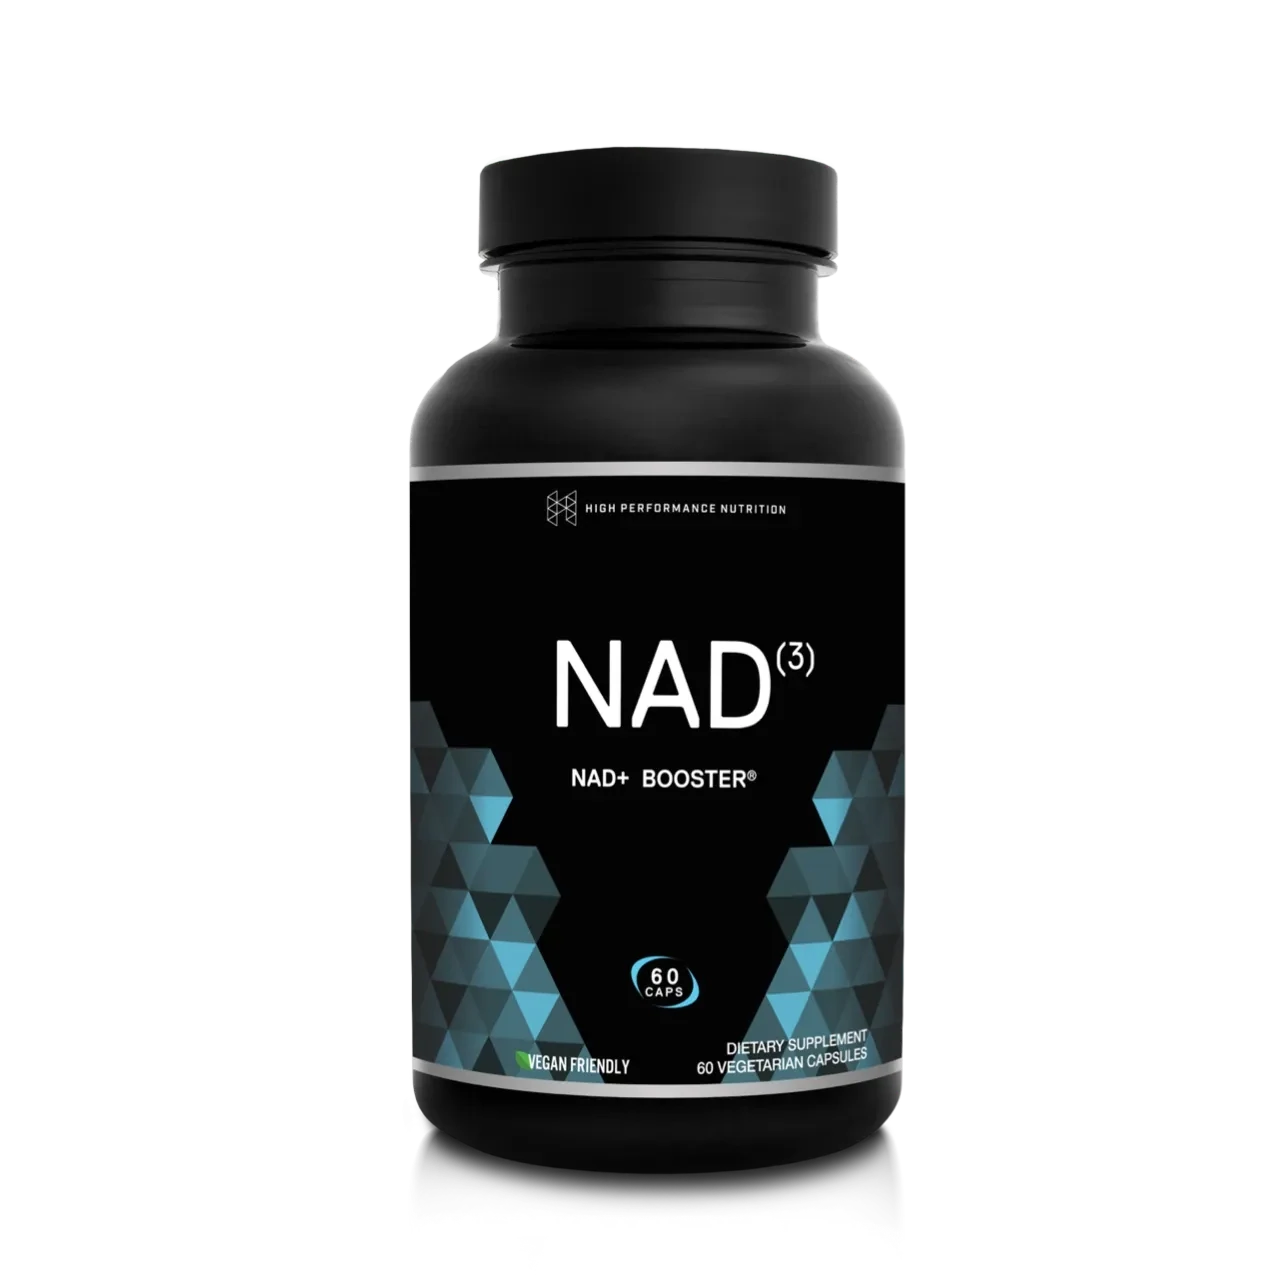 High Performance Nutrition NAD(3) NAD+ Booster